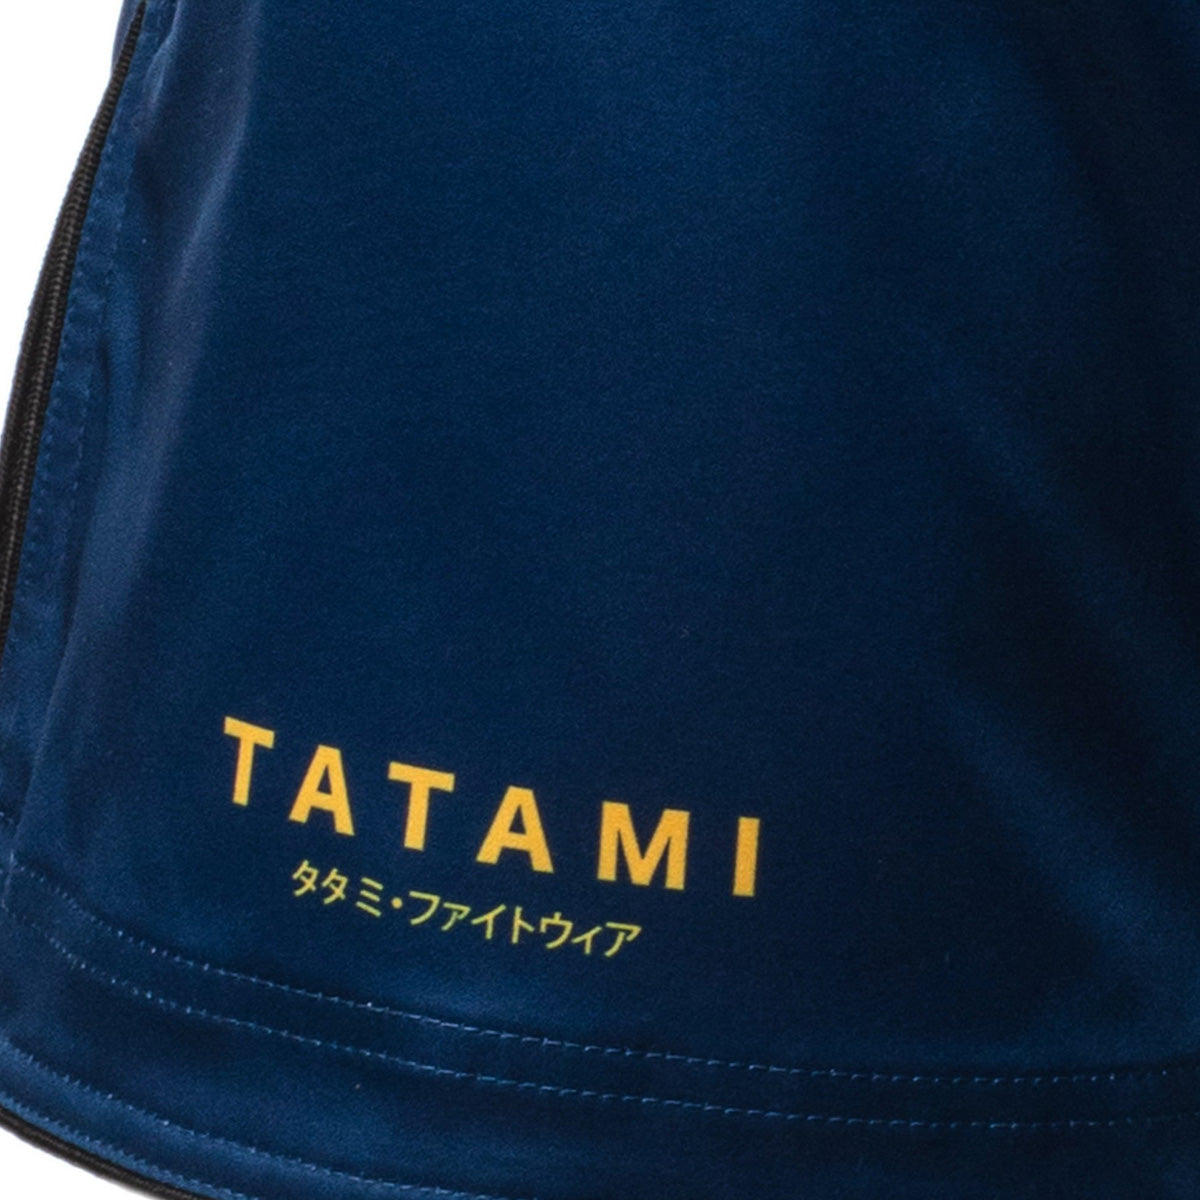 Tatami Fightwear on X: New in our accessories range - grappling